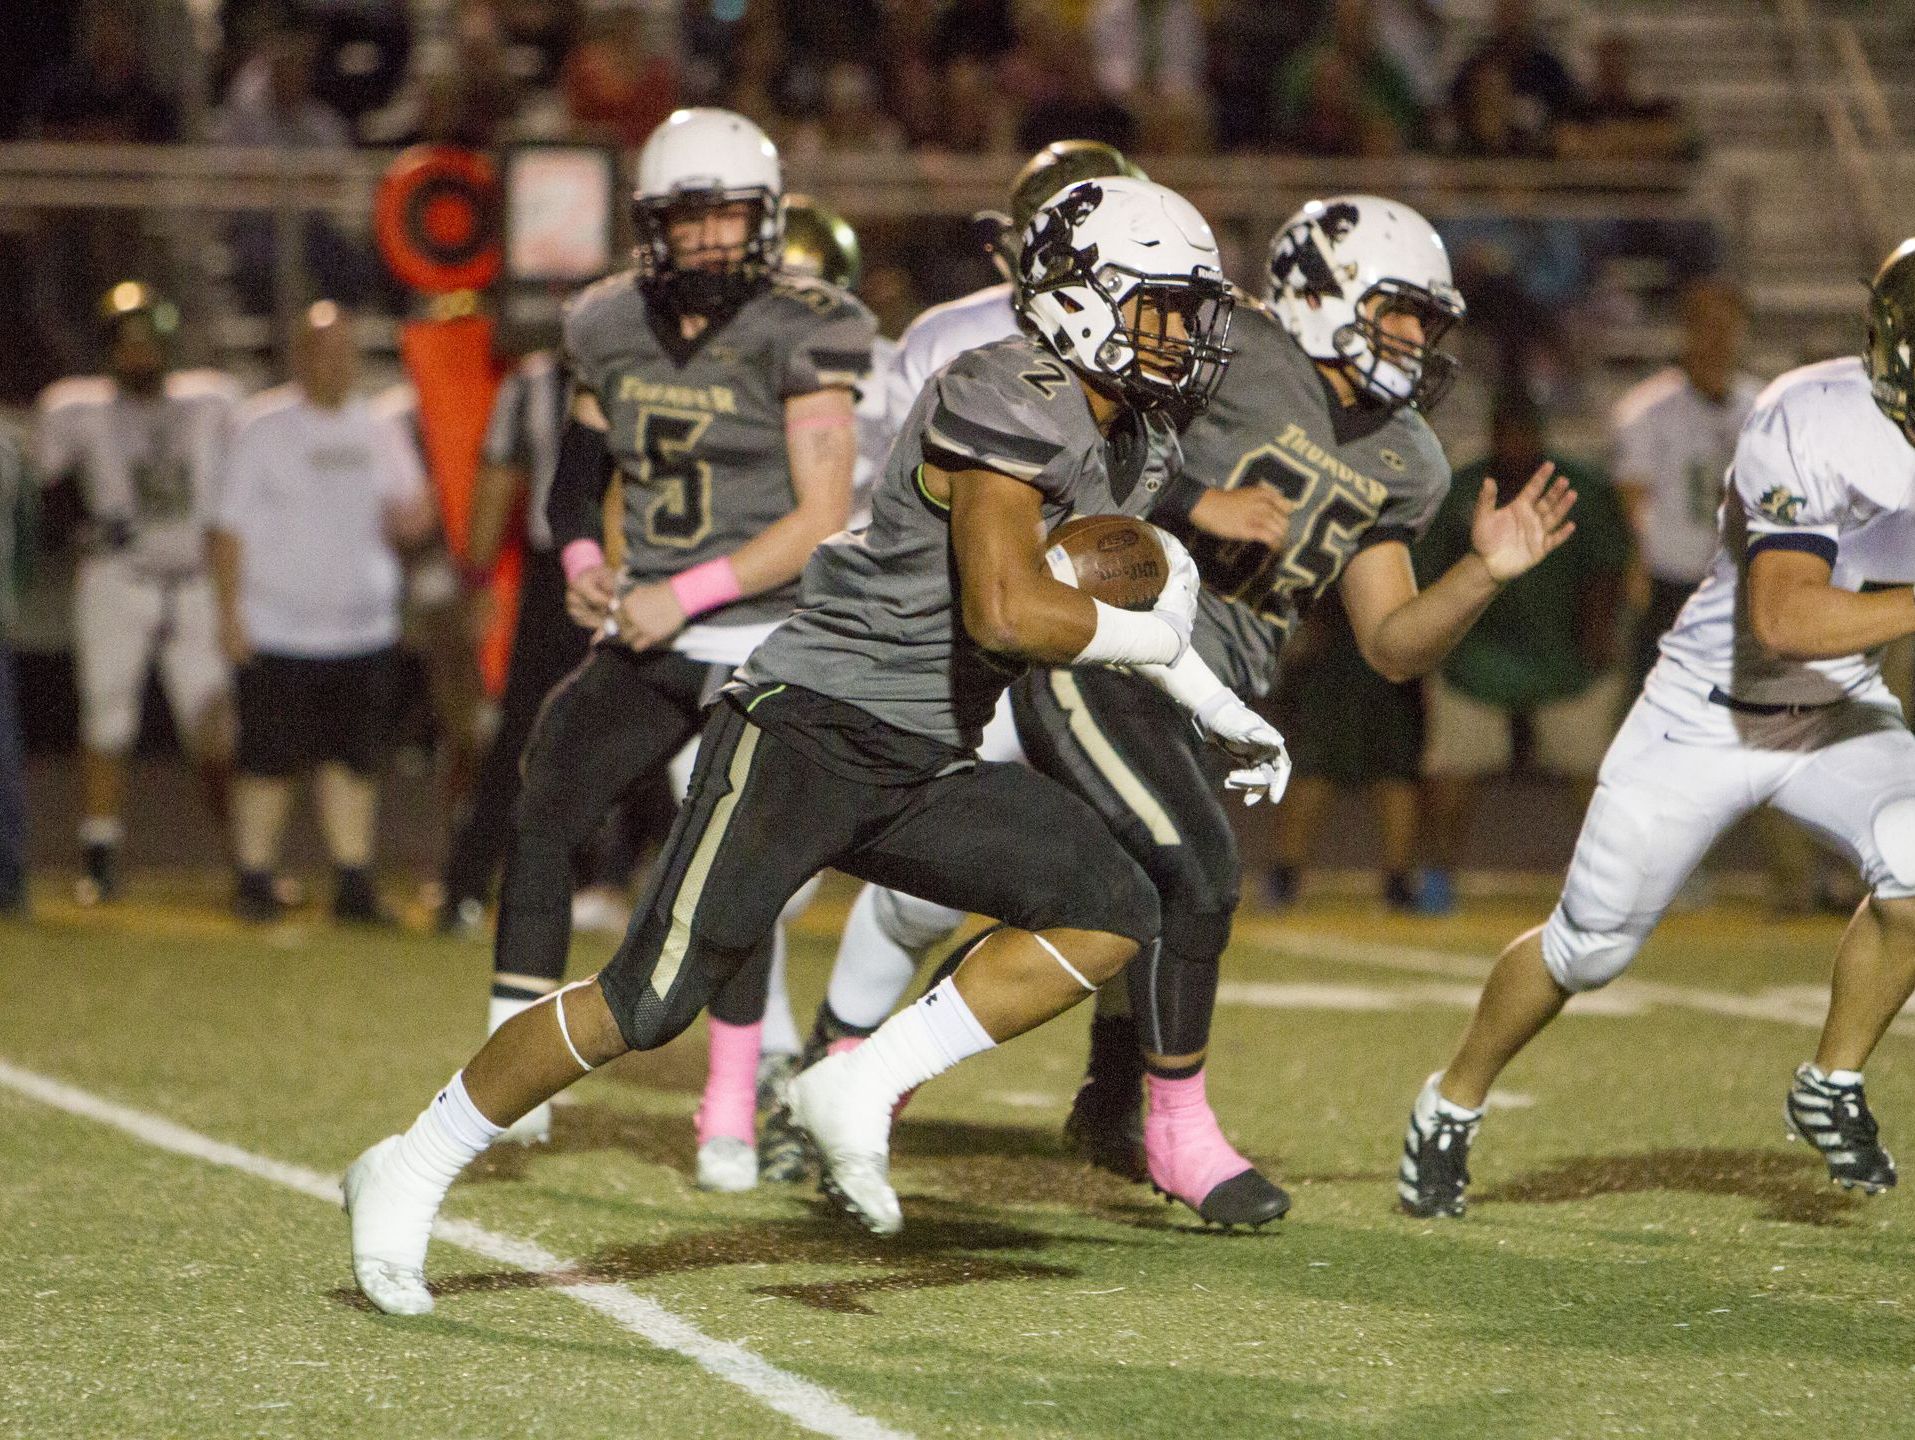 Desert Hills' Nephi Sewell suffered a season-ending neck injury last year, but has since made an amazing comeback to lead his team into the 3AA Playoffs this season.